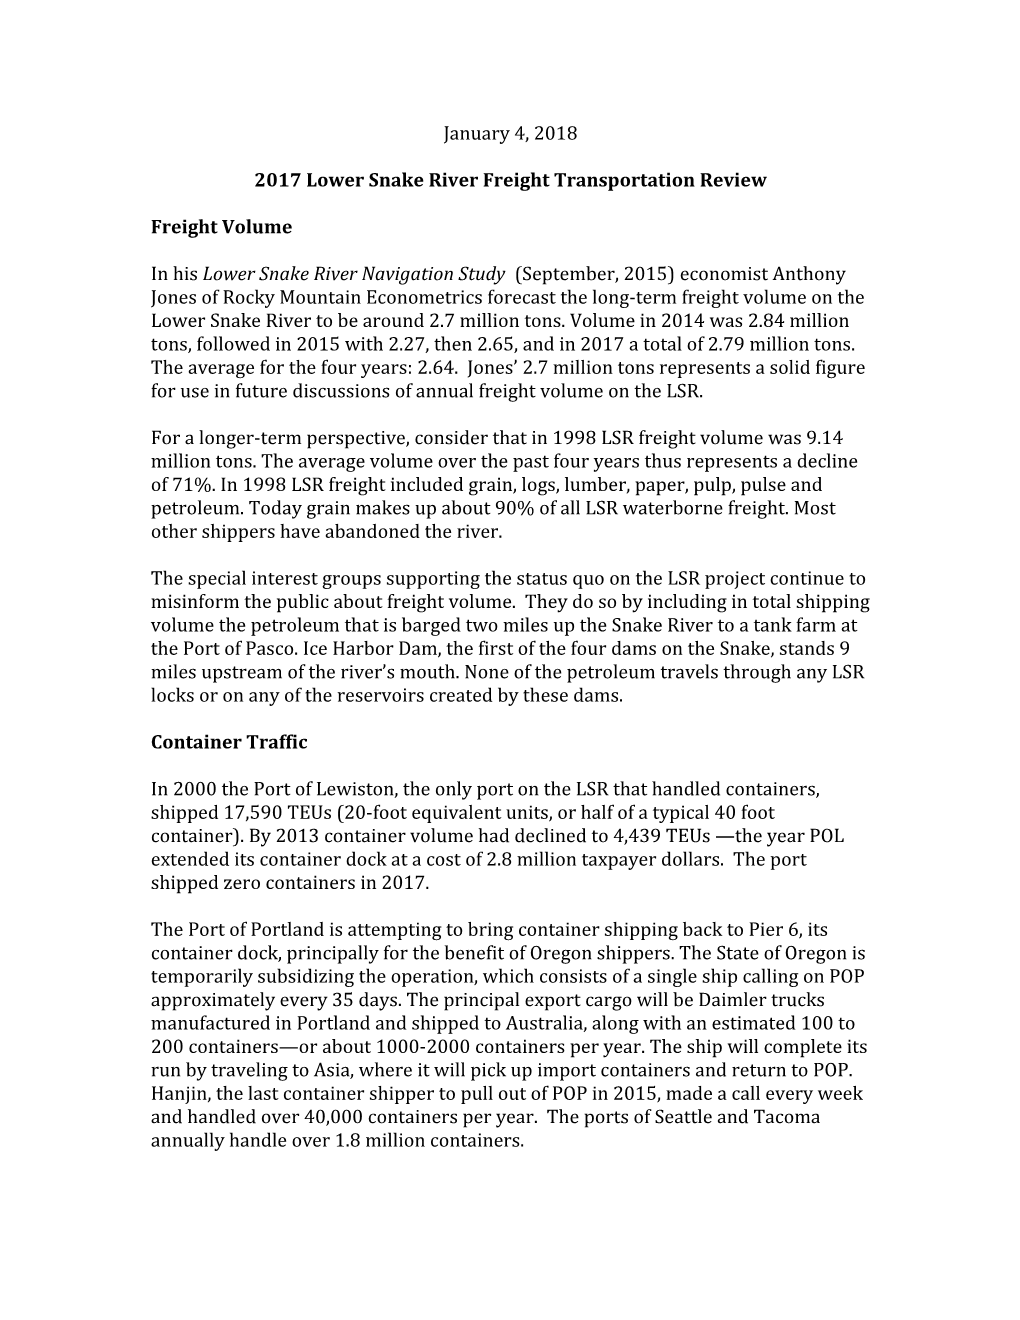 2017 Lower Snake River Freight Transportation Review